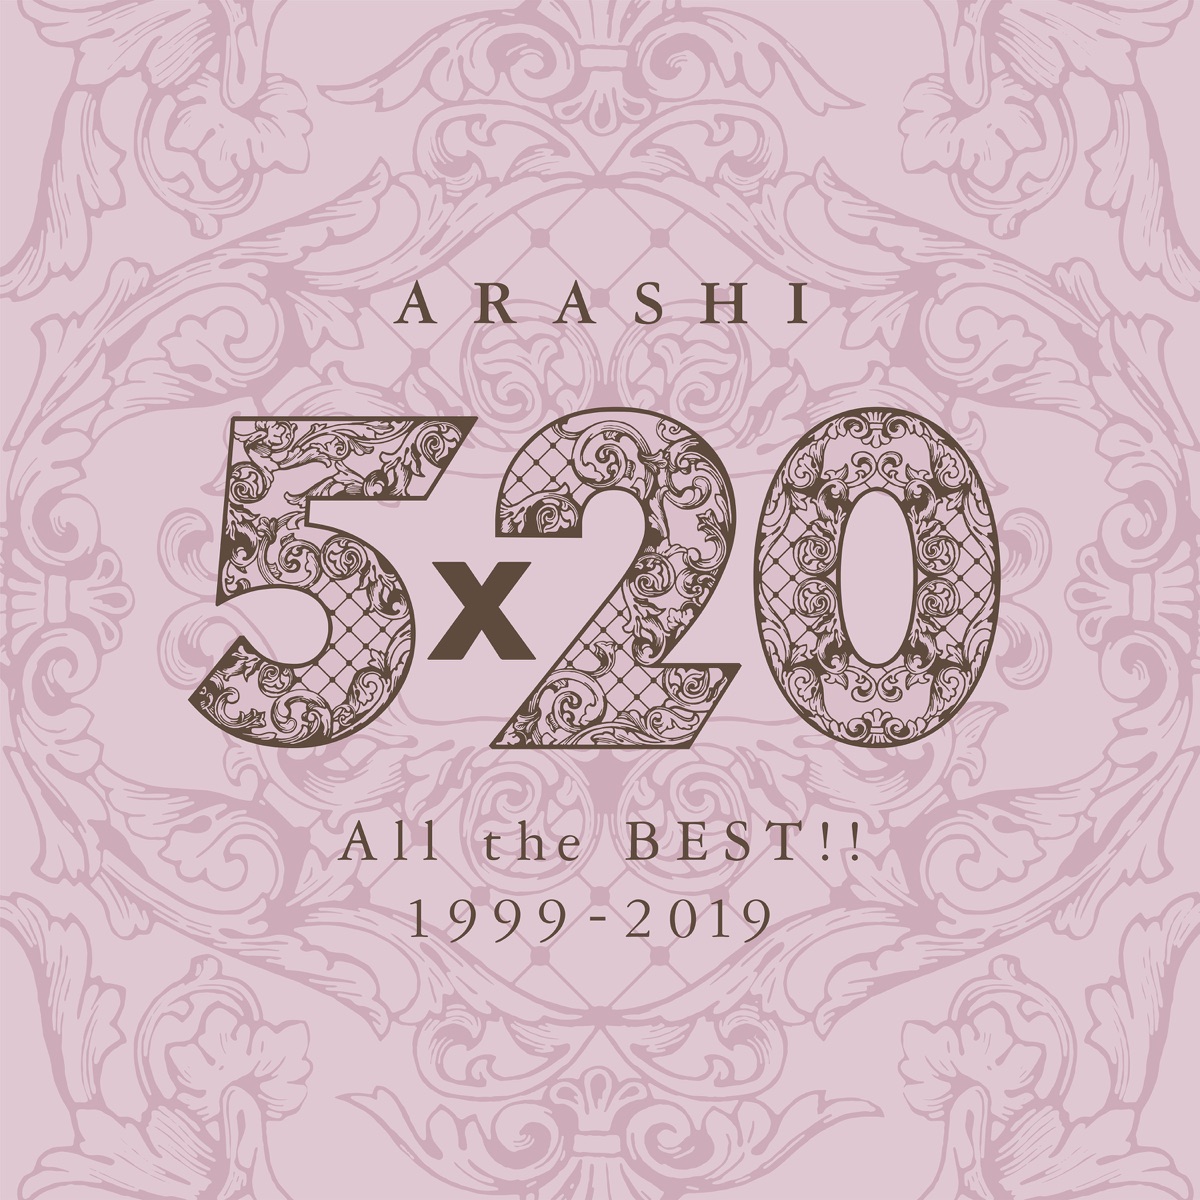 5×20 All the BEST!! 1999-2019 (Special Edition) - 嵐のアルバム 